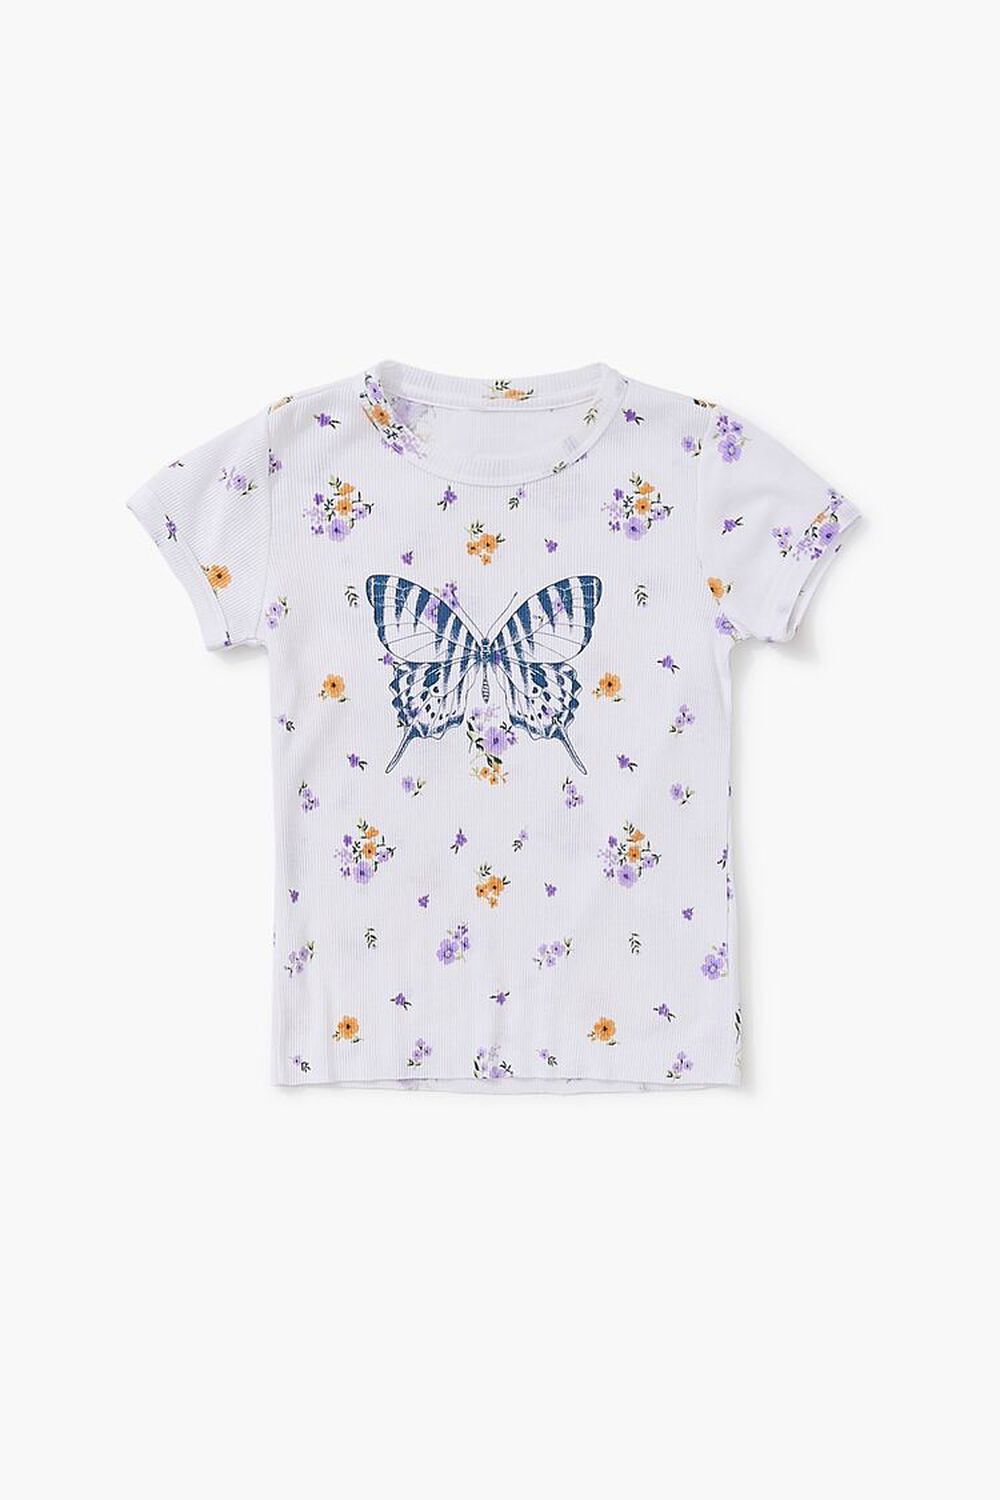 WHITE/MULTI Girls Butterfly Graphic Tee (Kids), image 1